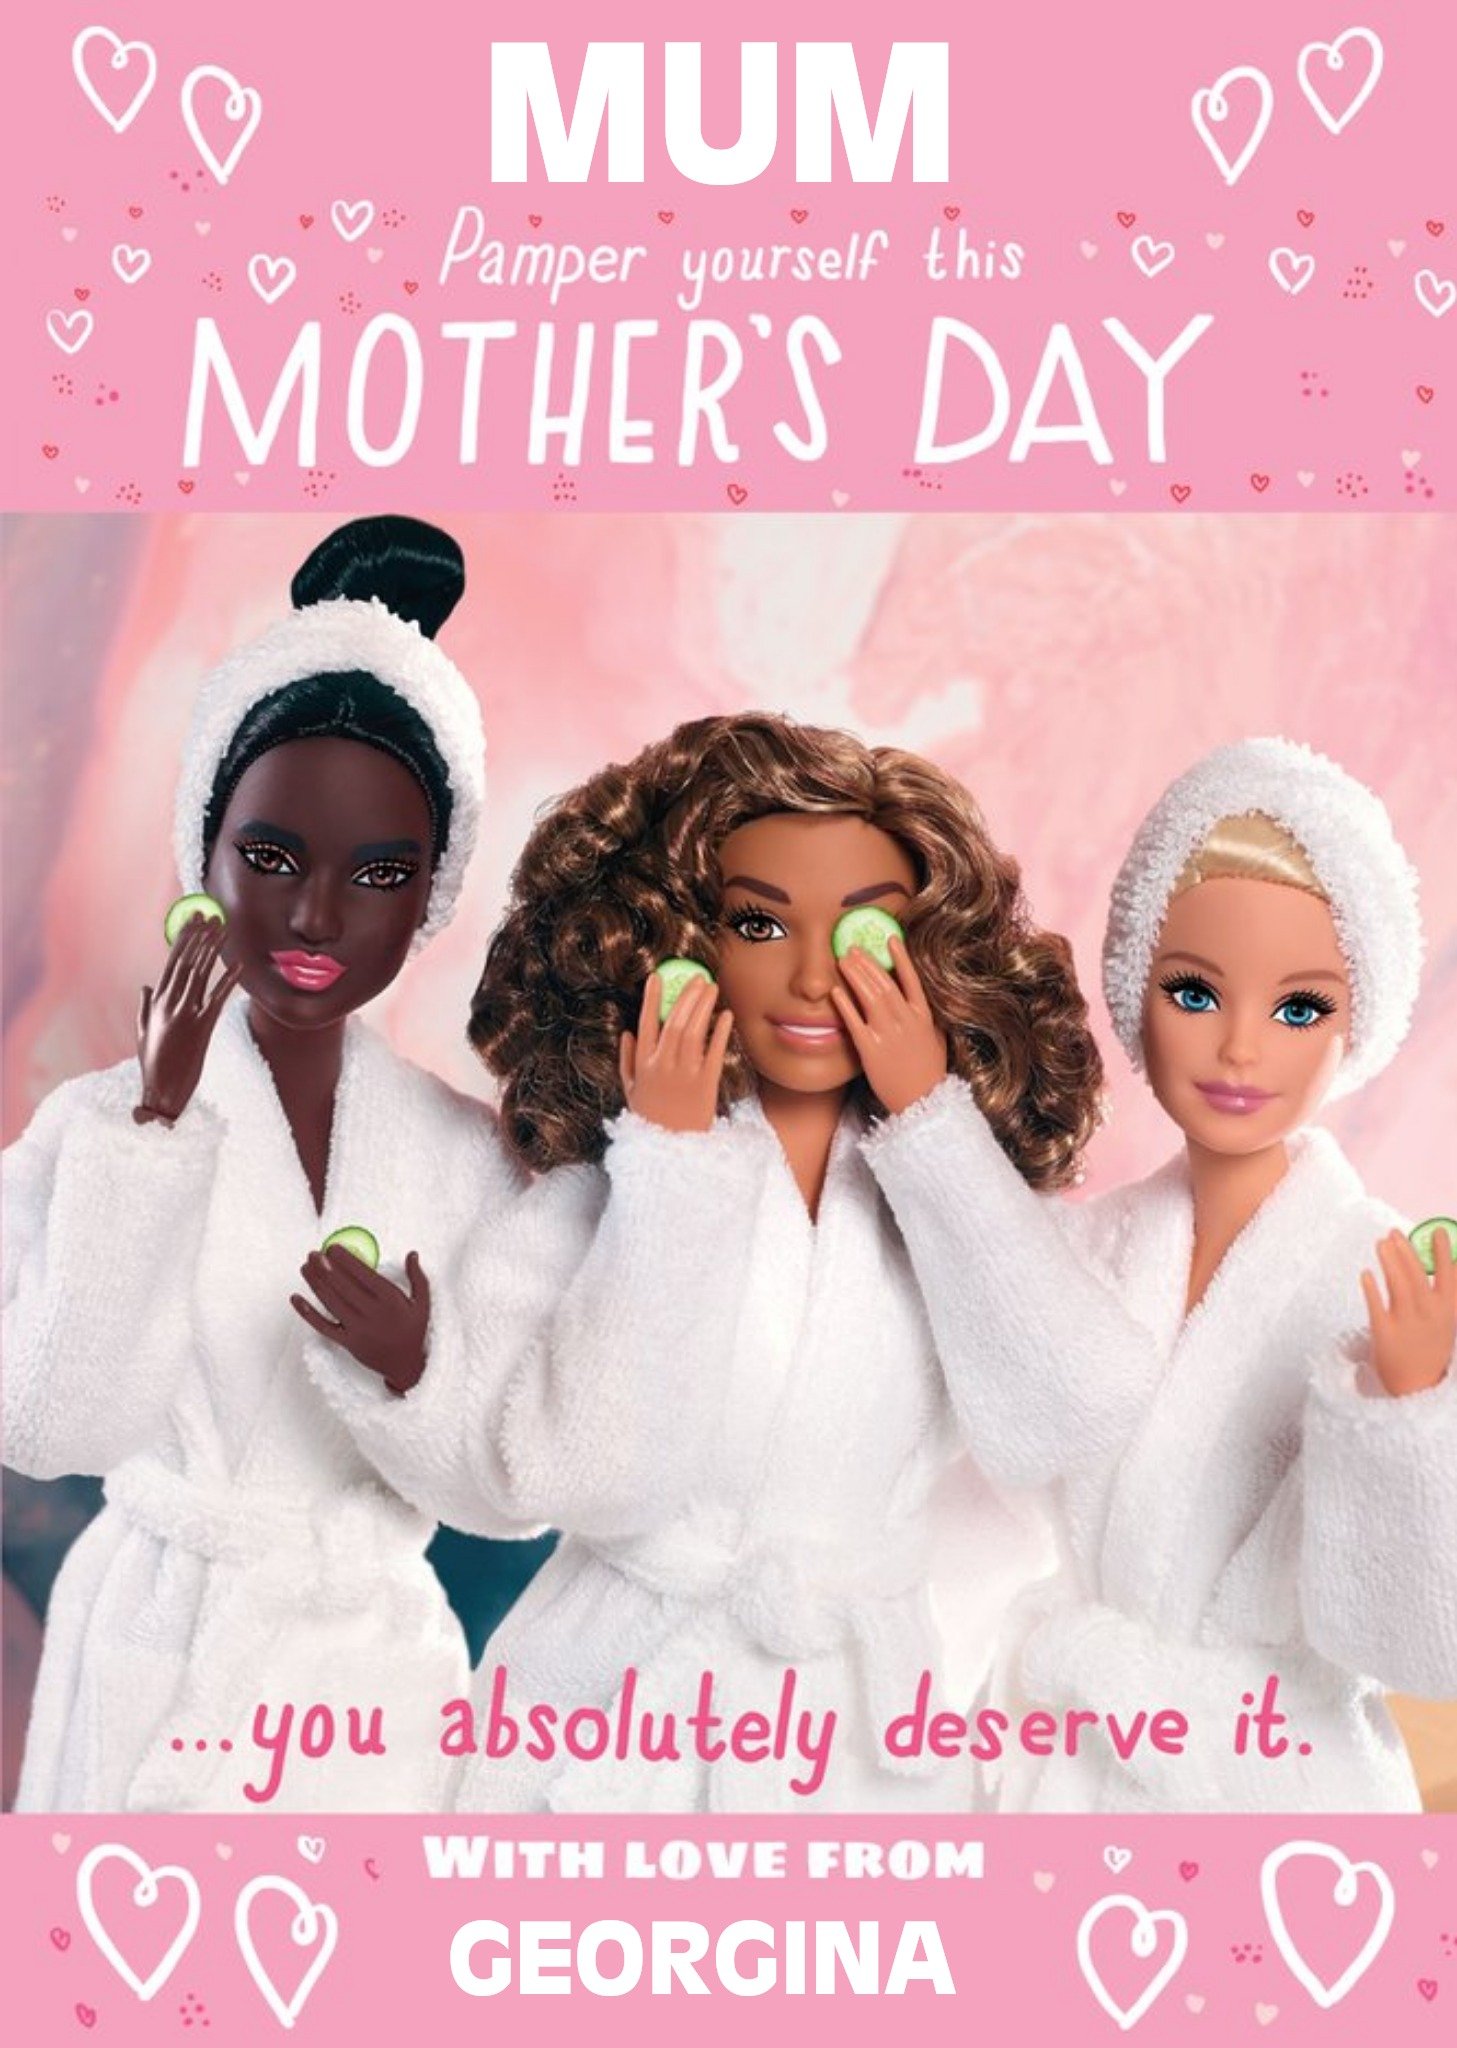 Pamper Yourself You Deserve It Mum Barbie Mother's Day Card Ecard